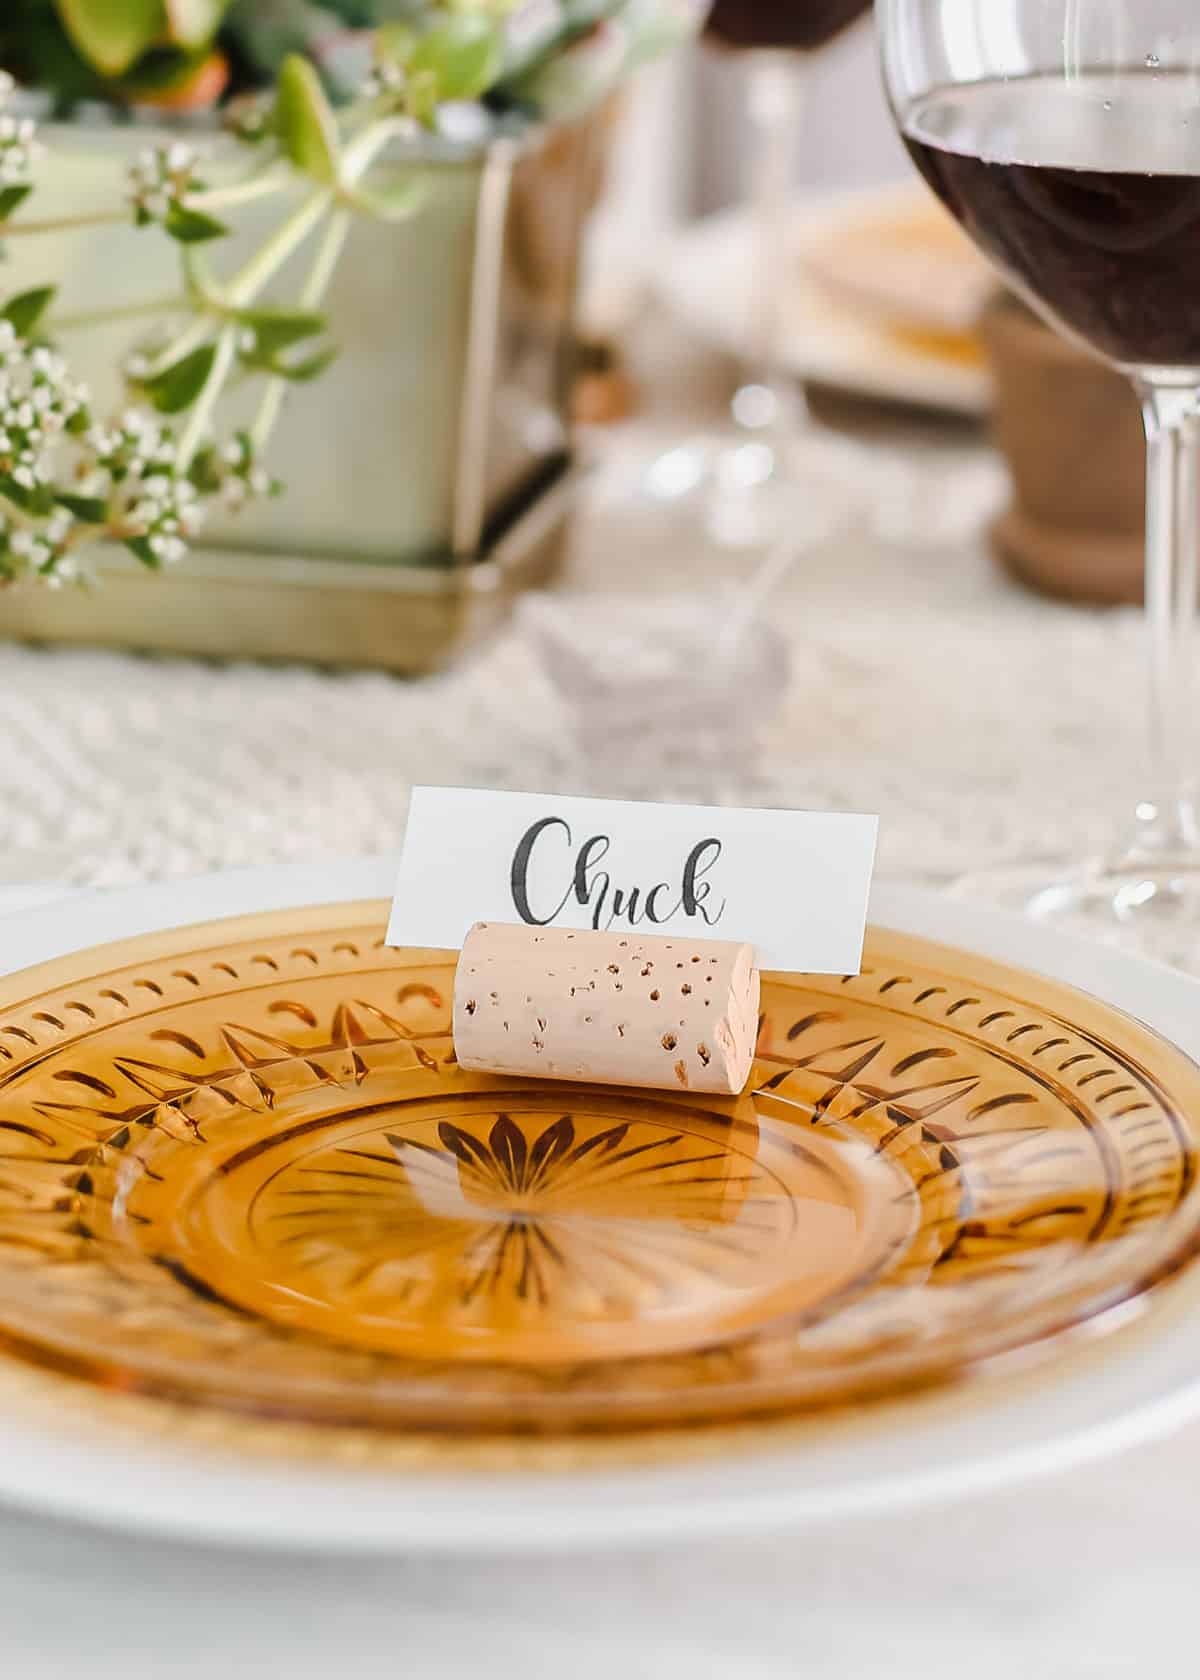 amber glass plate with cork place card holder on top.